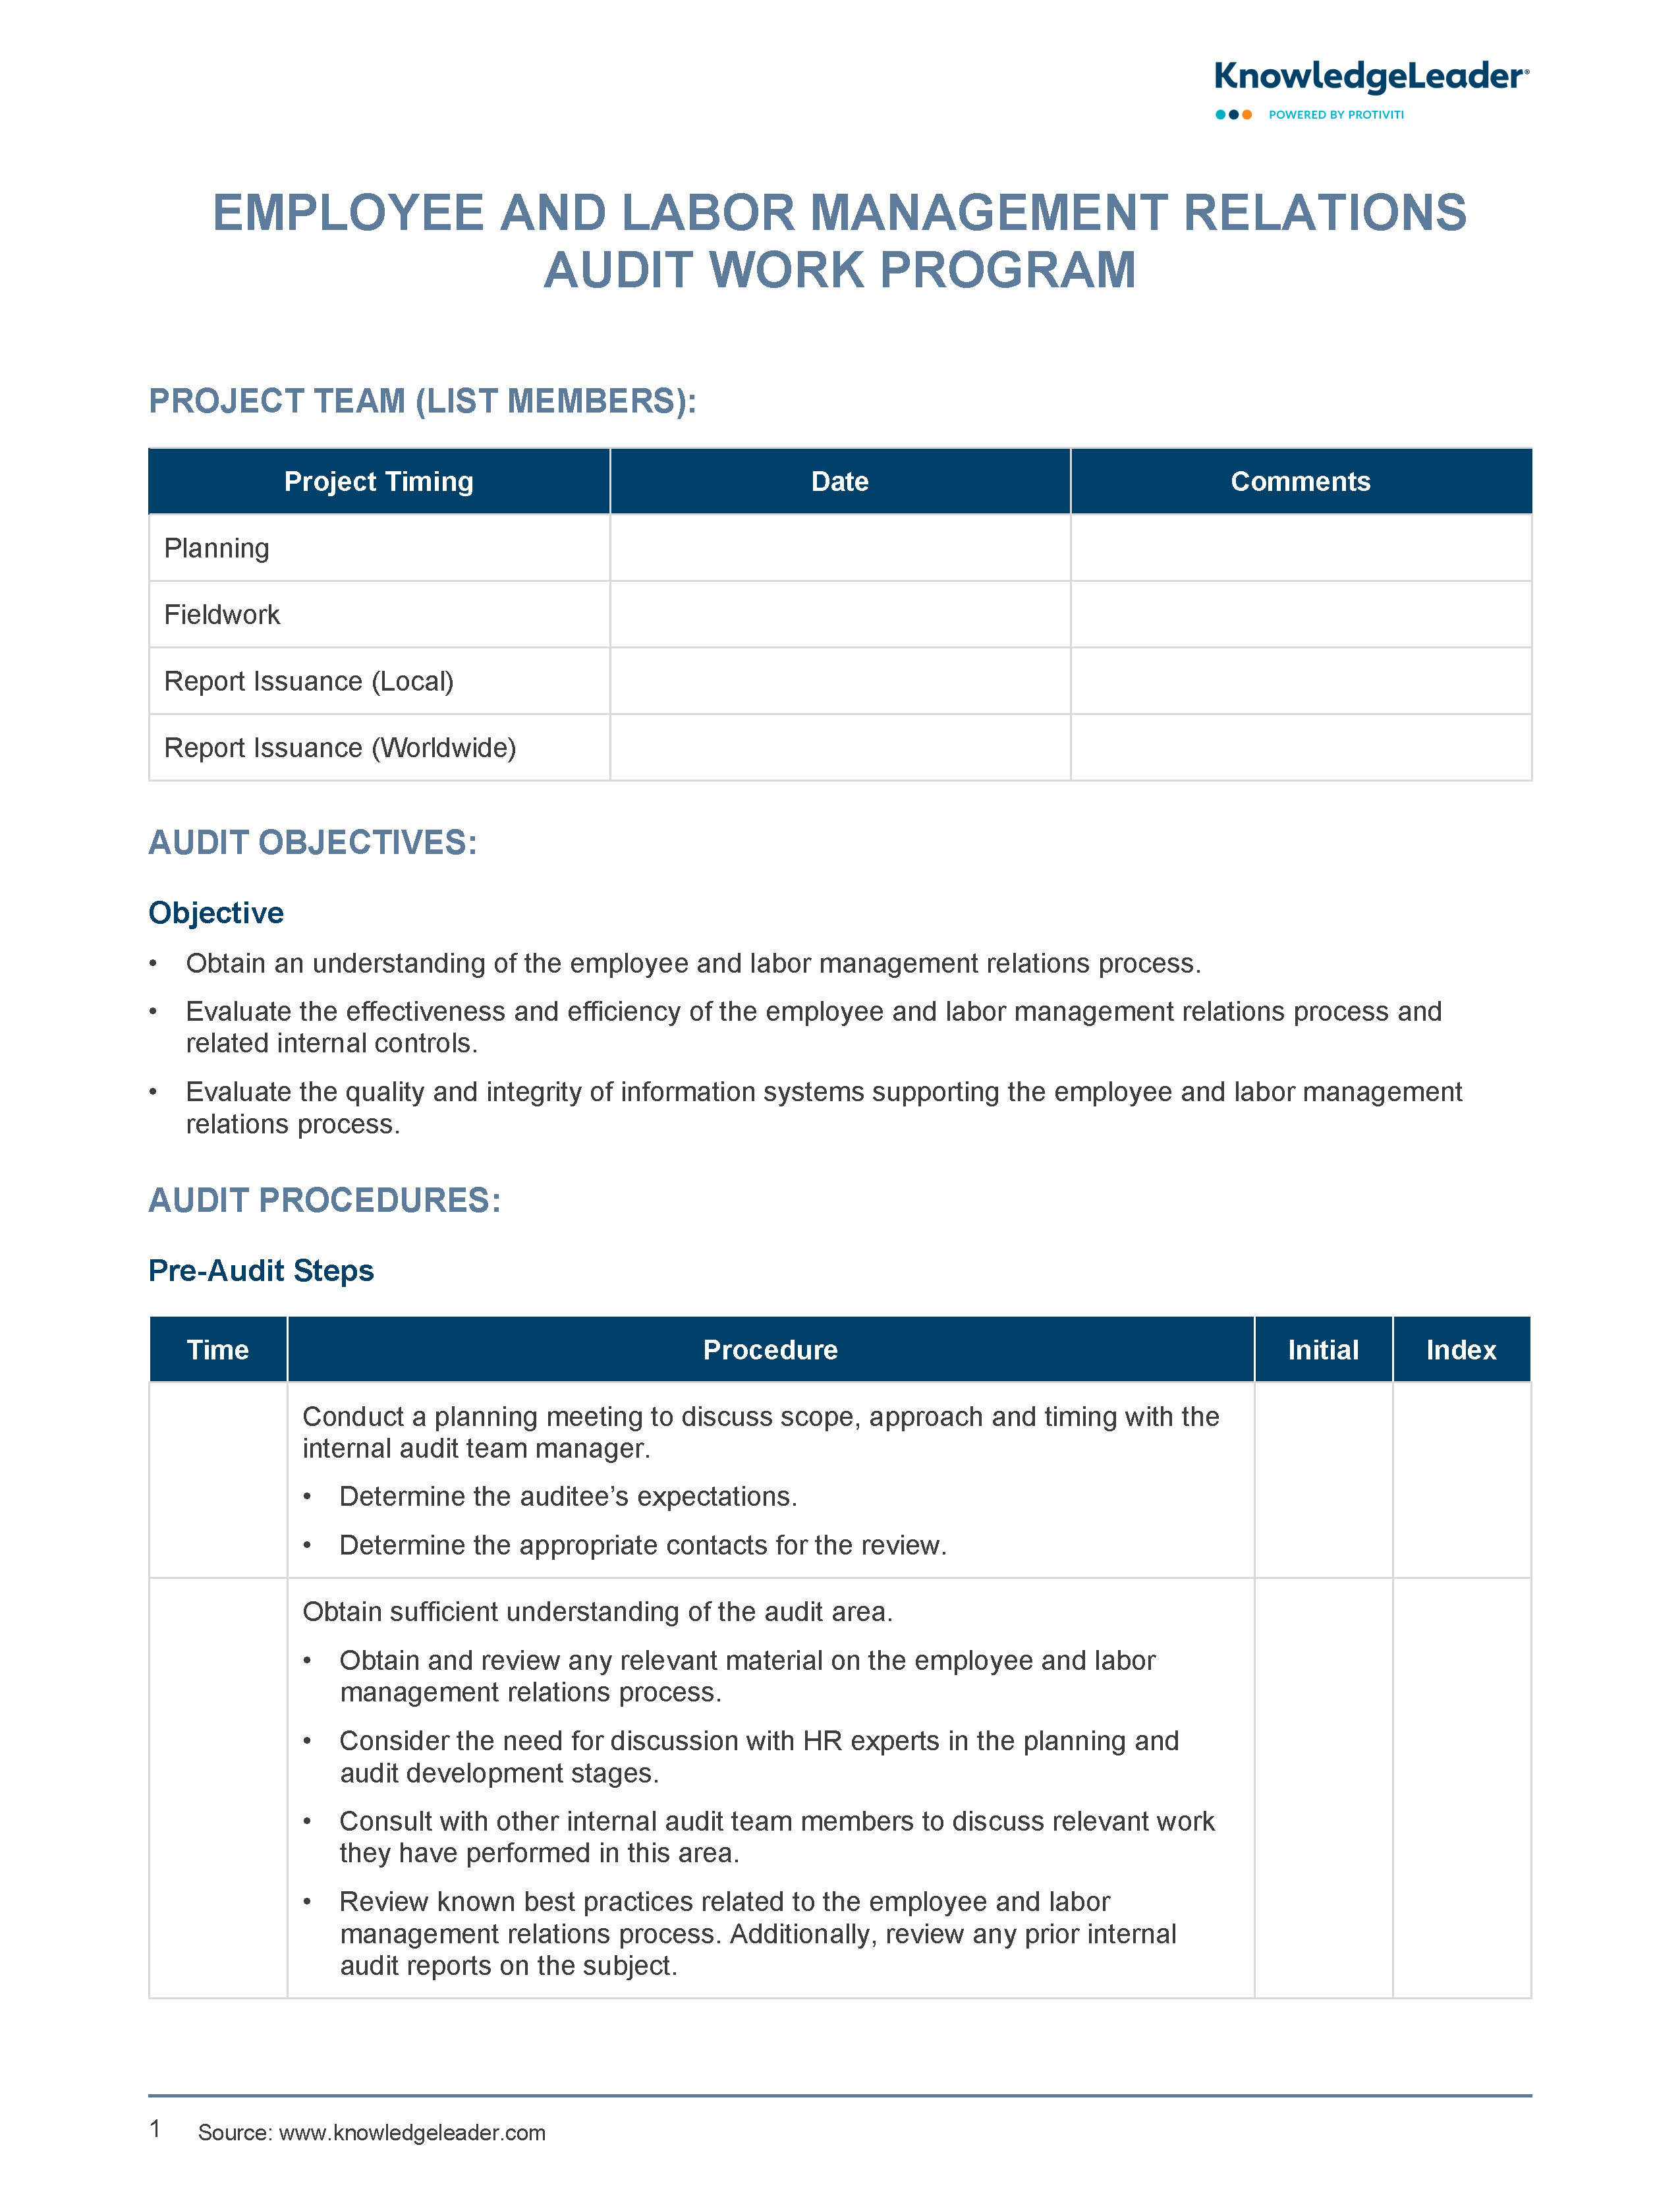 Screenshot of the first page of Employee and Labor Management Relations Audit Work Program